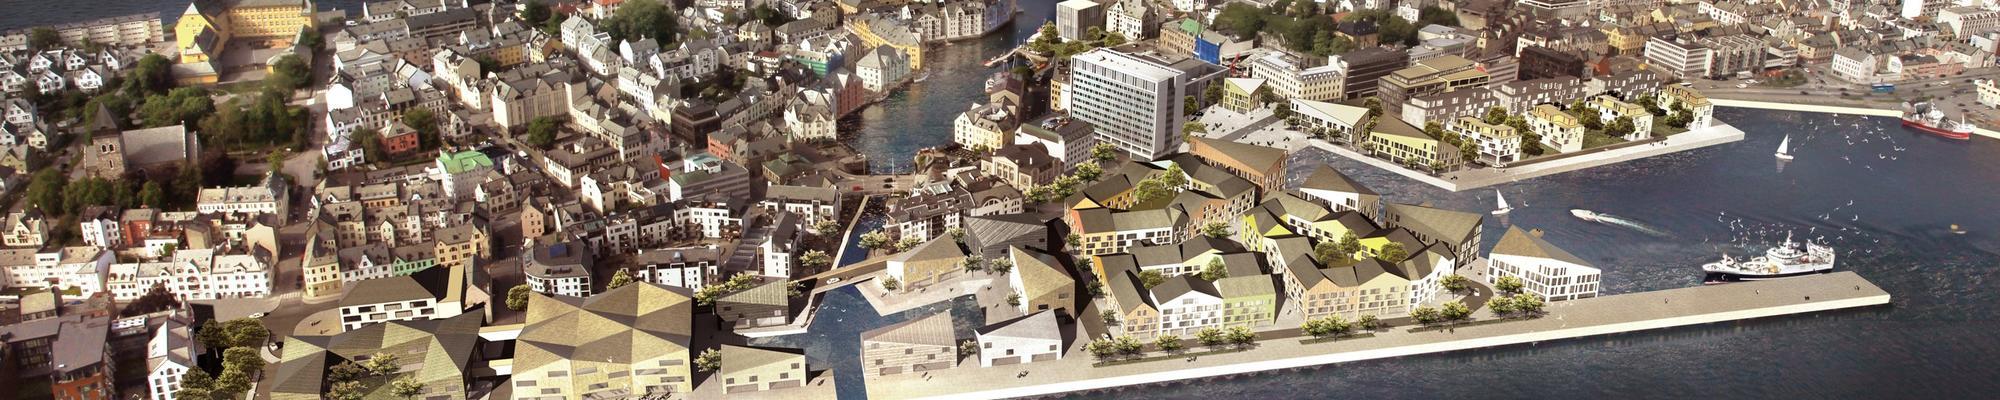 The picture is a visualistion from above of how the Sørsida area might look in the future. It show the city of Ålesund and what appears to be a seriies of new buildings on the waterfront area.